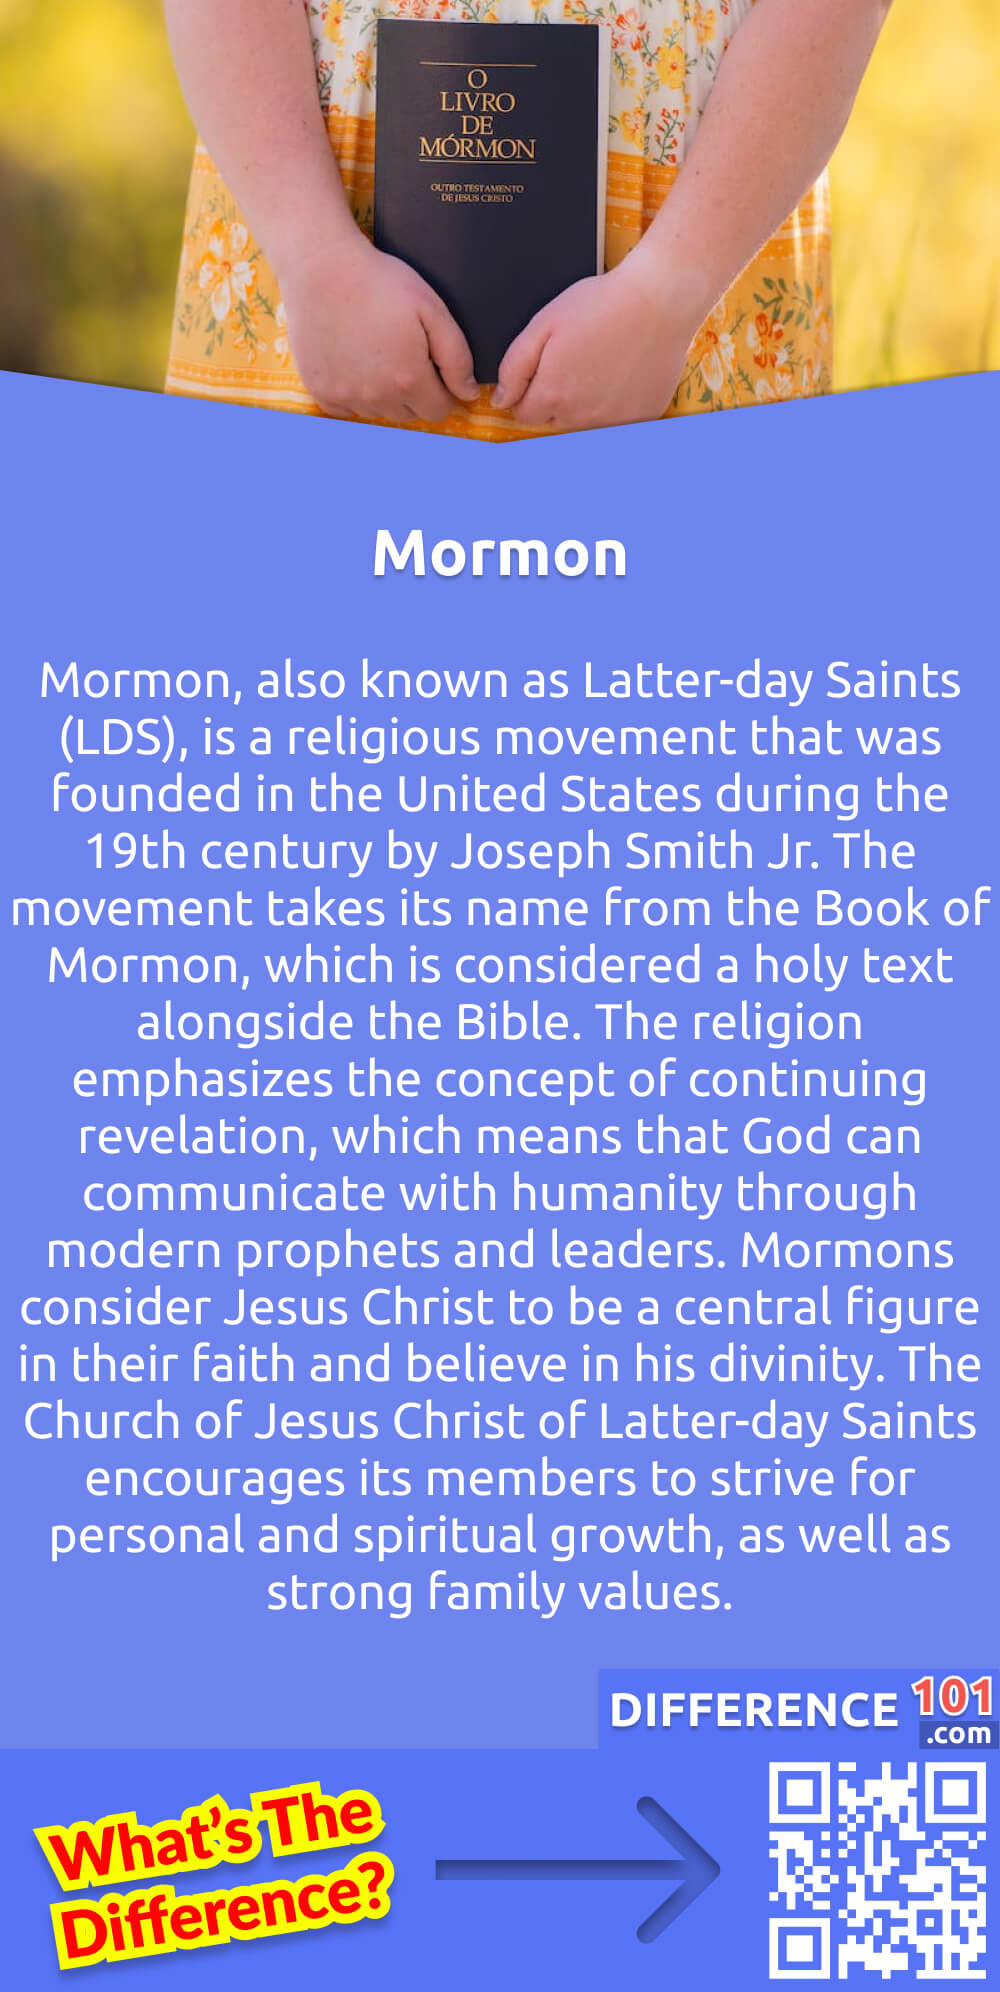 What Is Mormon? Mormon, also known as Latter-day Saints (LDS), is a religious movement that was founded in the United States during the 19th century by Joseph Smith Jr. The movement takes its name from the Book of Mormon, which is considered a holy text alongside the Bible. The religion emphasizes the concept of continuing revelation, which means that God can communicate with humanity through modern prophets and leaders. Mormons consider Jesus Christ to be a central figure in their faith and believe in his divinity. The Church of Jesus Christ of Latter-day Saints encourages its members to strive for personal and spiritual growth, as well as strong family values. Mormons place great importance on family bonds and actively engage in genealogical research to perform religious ceremonies for deceased ancestors.